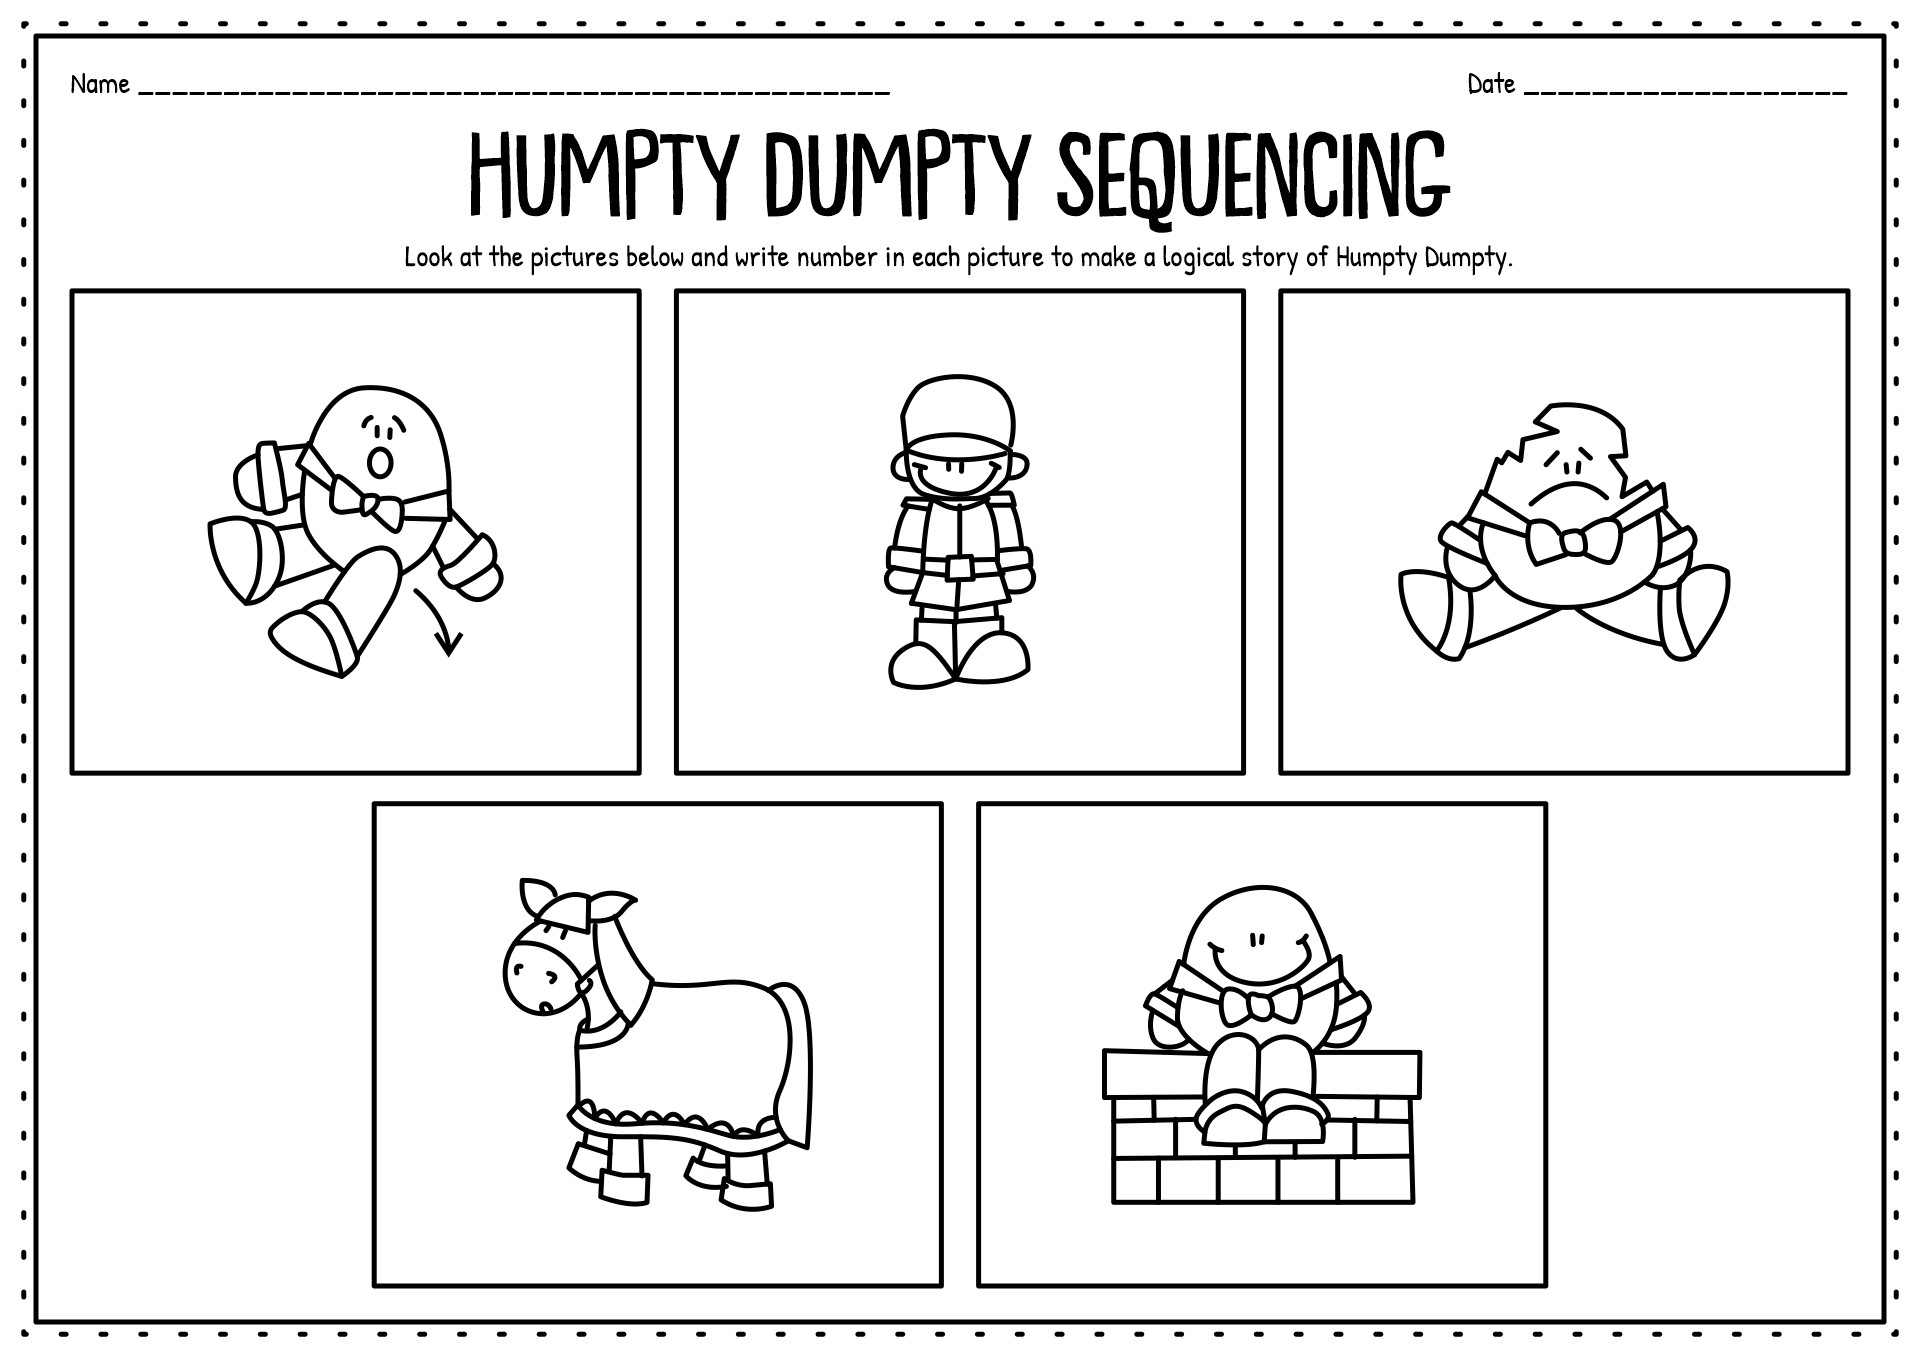 Humpty Dumpty Sequencing Printable